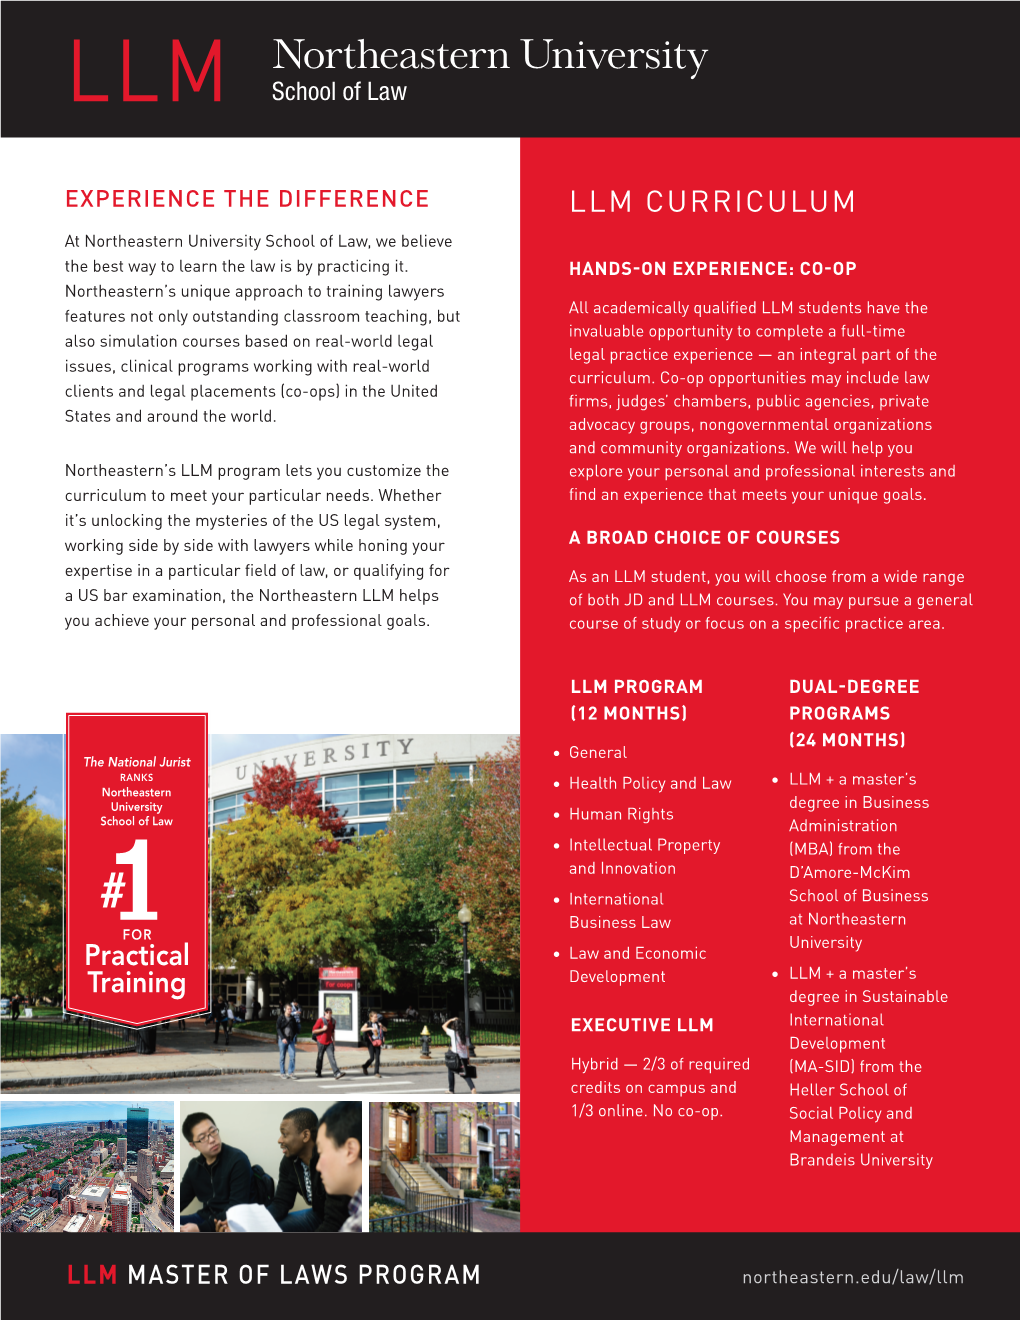 LLM CURRICULUM at Northeastern University School of Law, We Believe the Best Way to Learn the Law Is by Practicing It